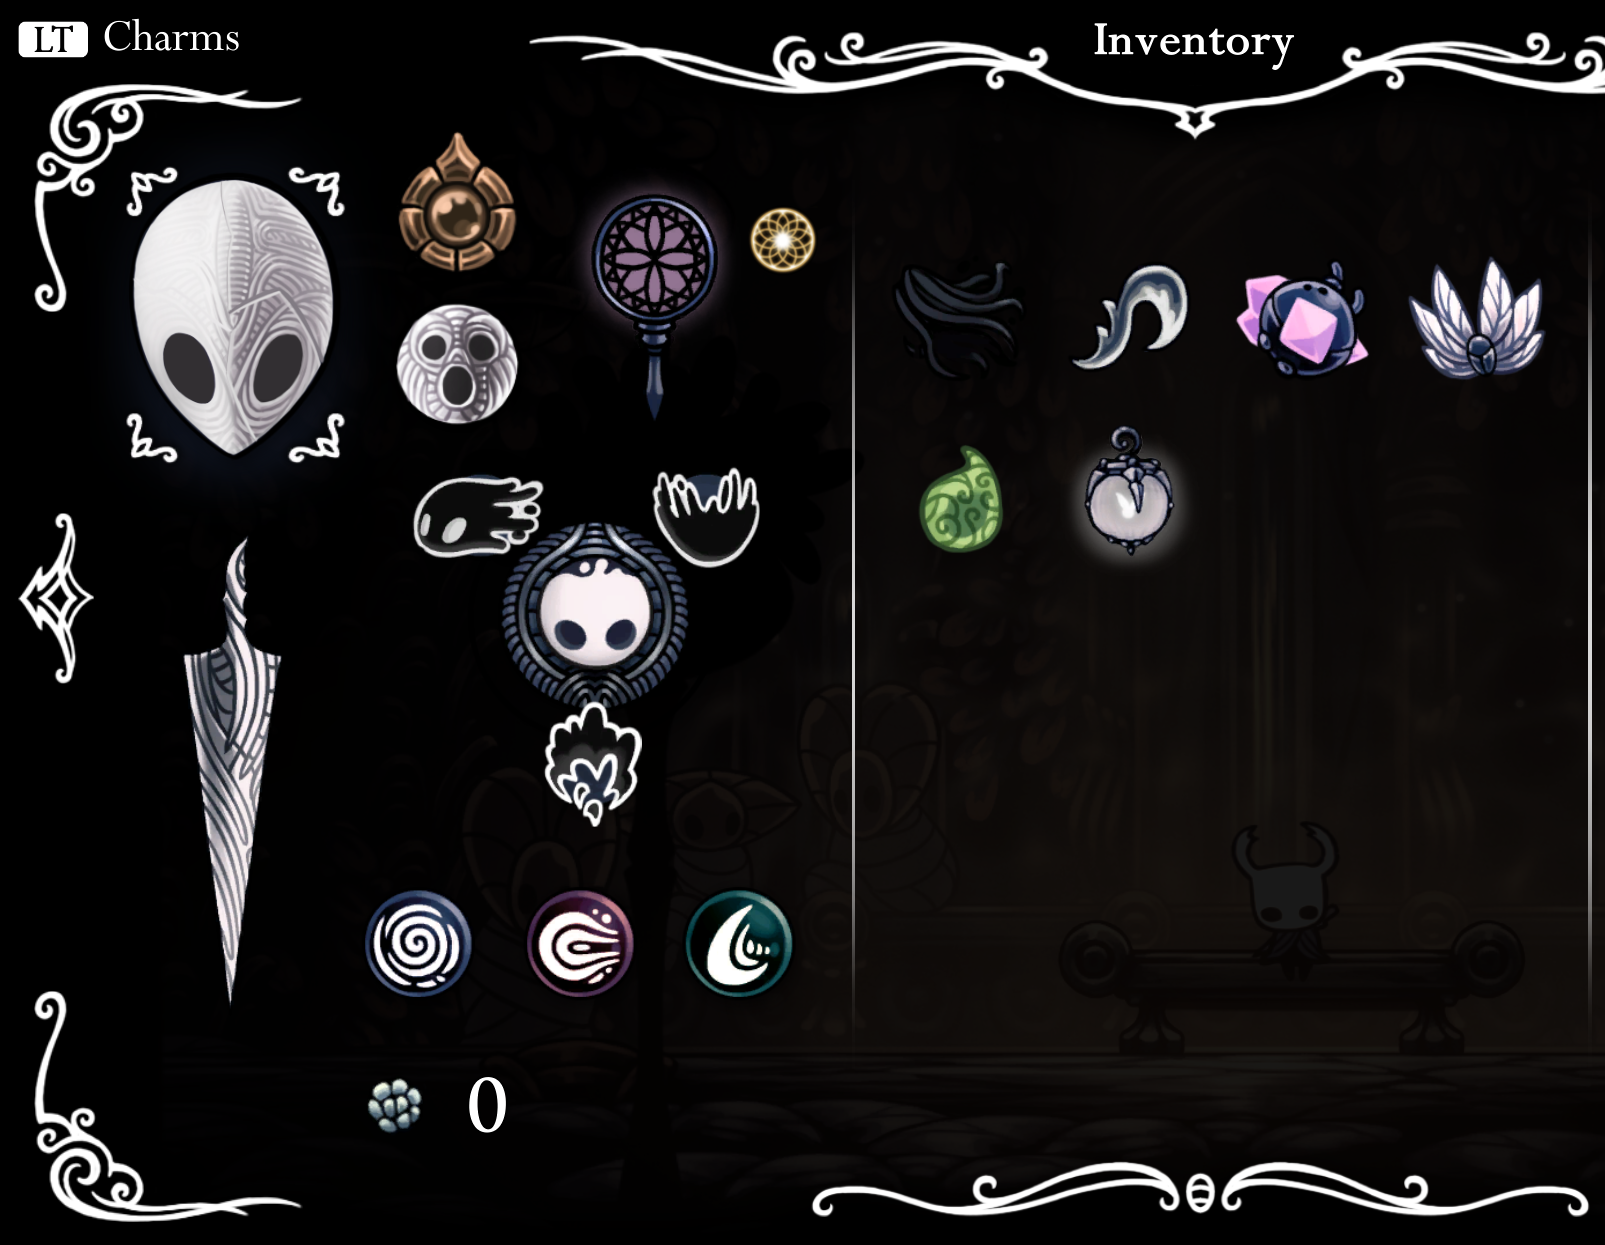 hollow knight save file location